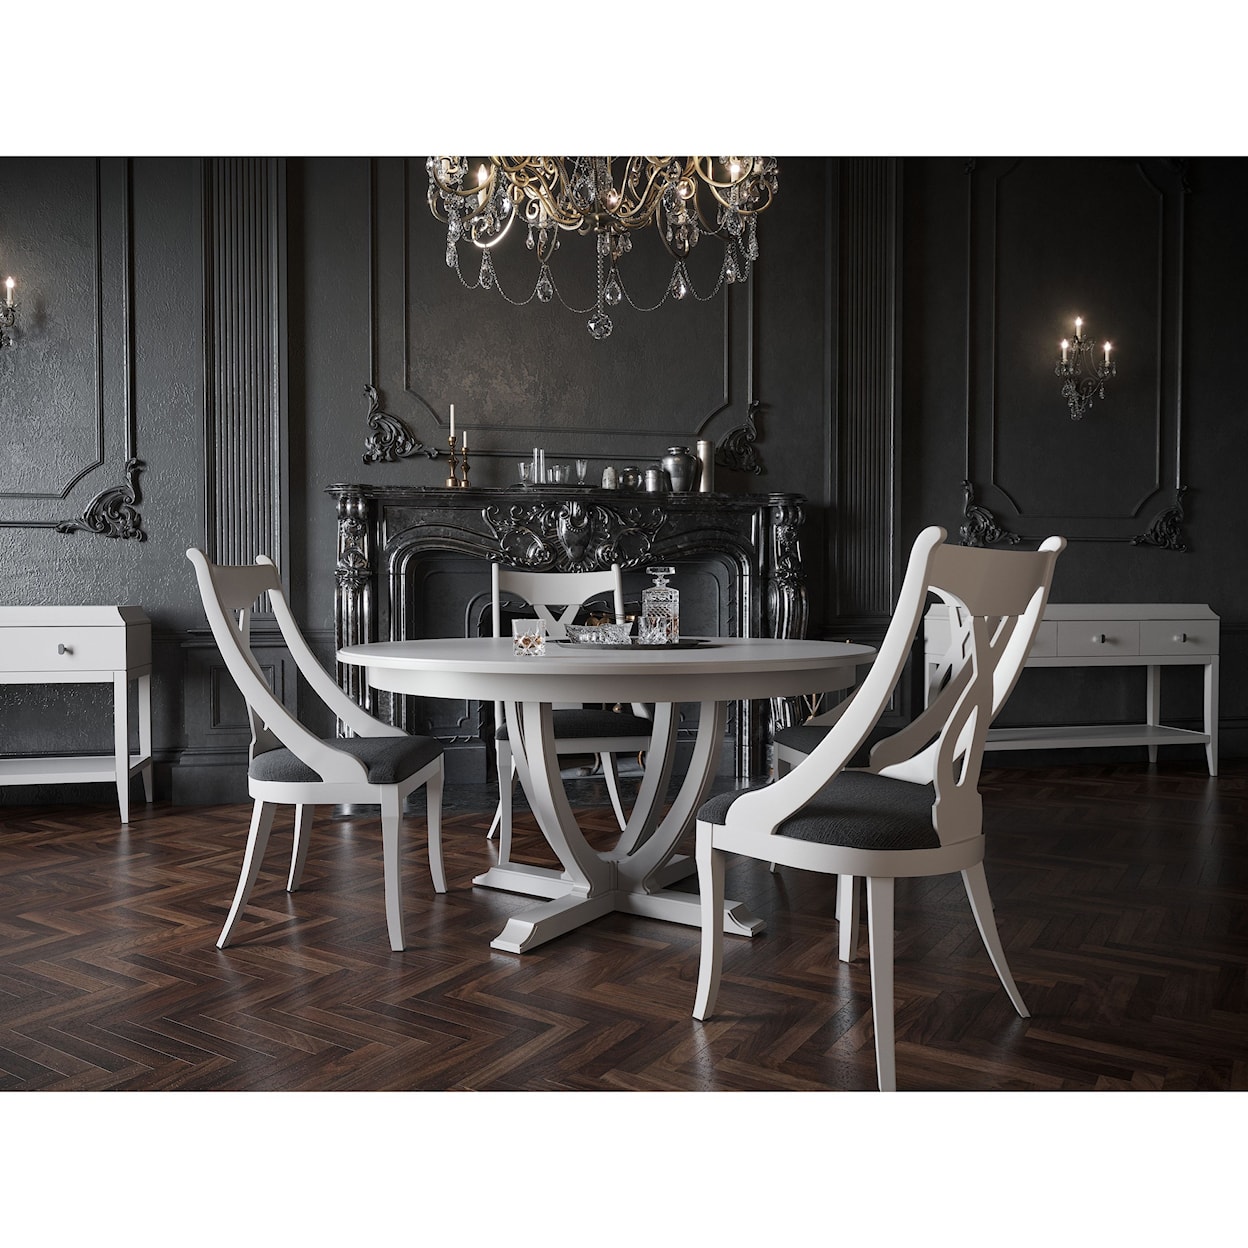 Canadel Classic Round Dining Table Set